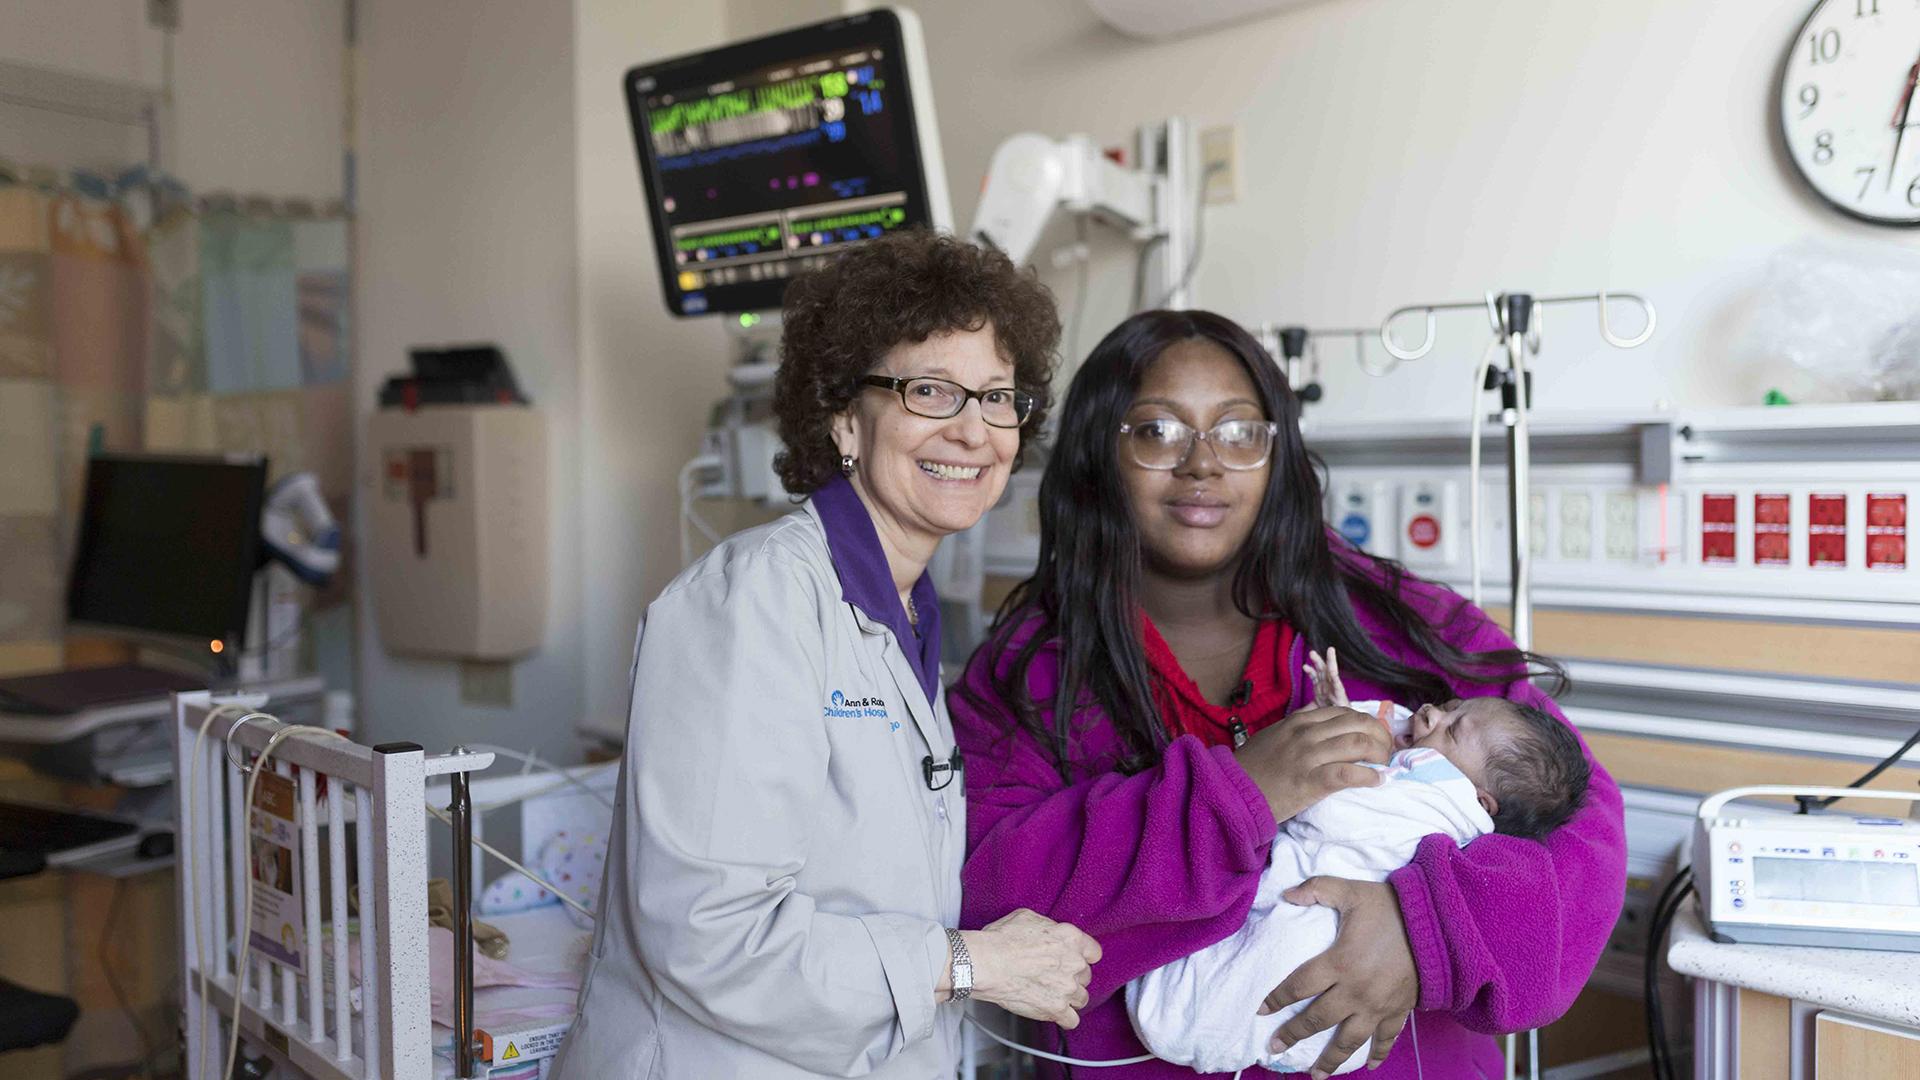 Dr. Amy Paller, left, and Taschana Taylor with her daughter, Grace, who participated in the Northwestern University study. (Courtesy of Northwestern University)